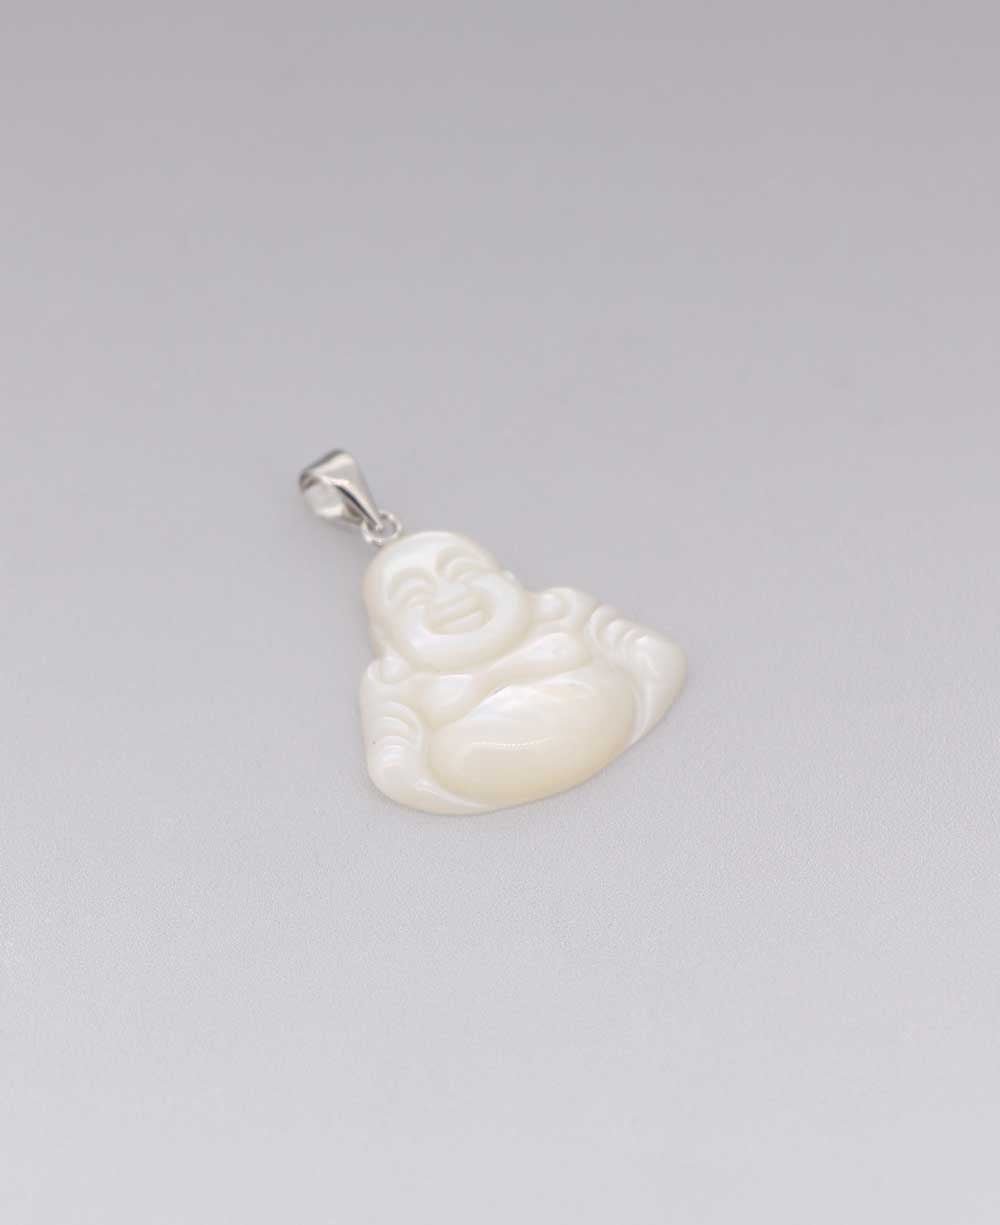 Mother of Pearl and Sterling Silver Happy Buddha Pendant - Charms & Pendants